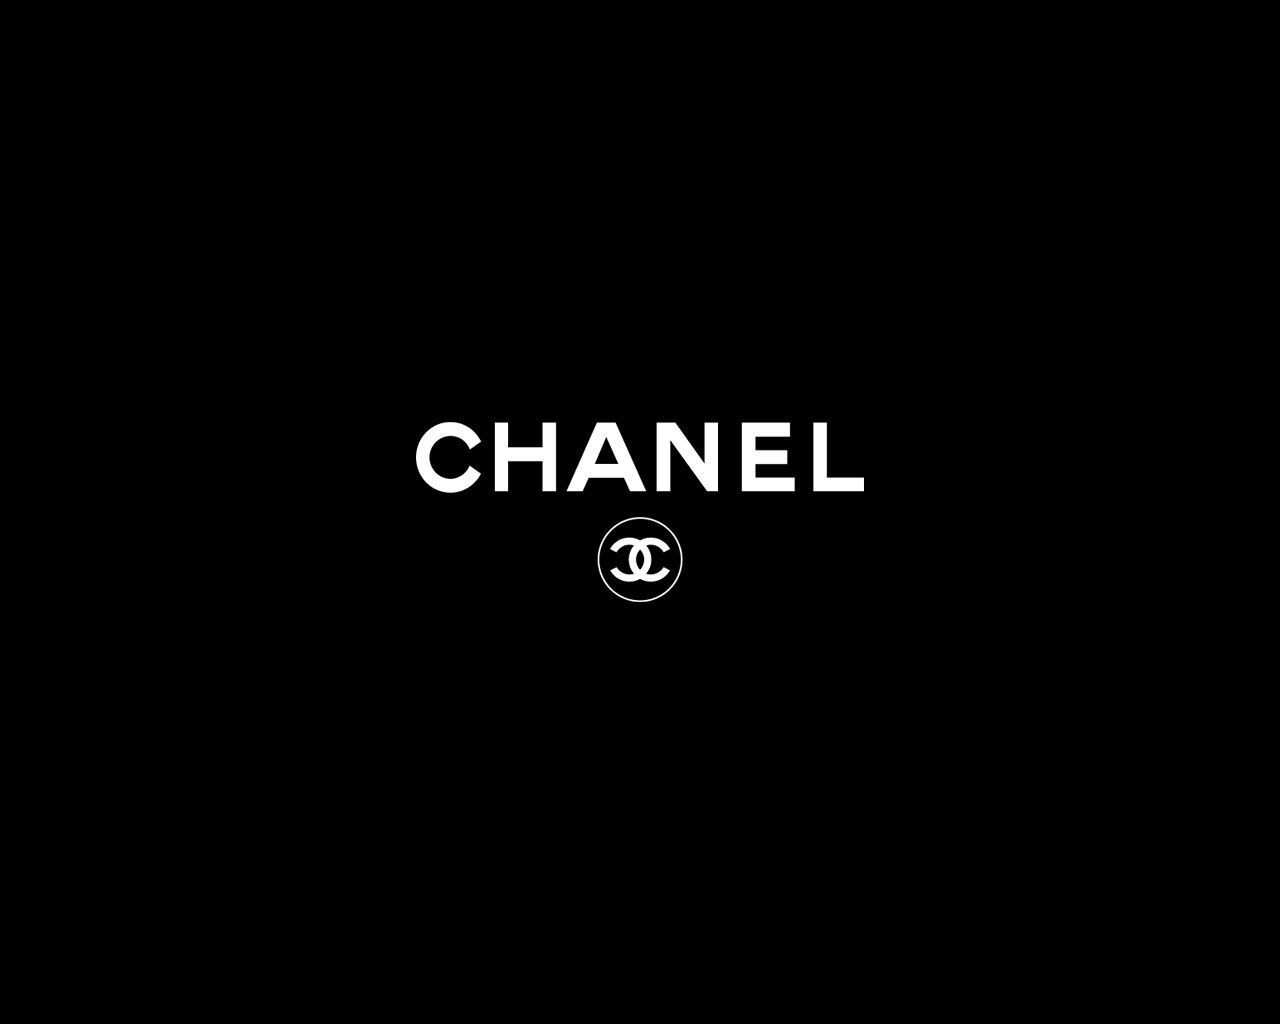 Chanel HD Backgrounds